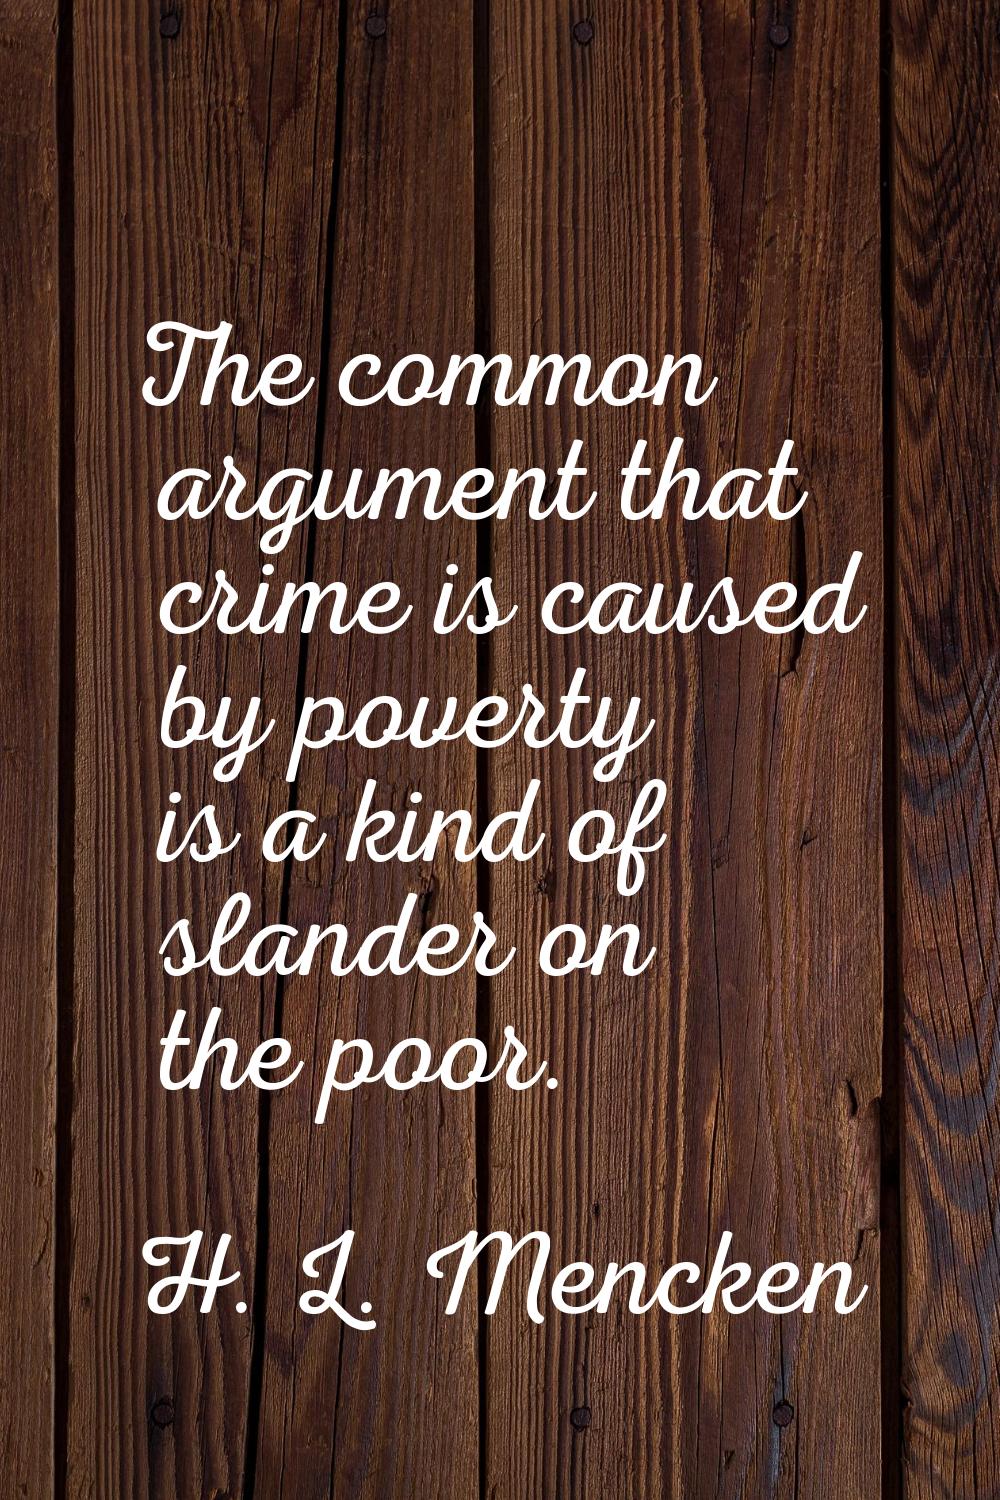 The common argument that crime is caused by poverty is a kind of slander on the poor.